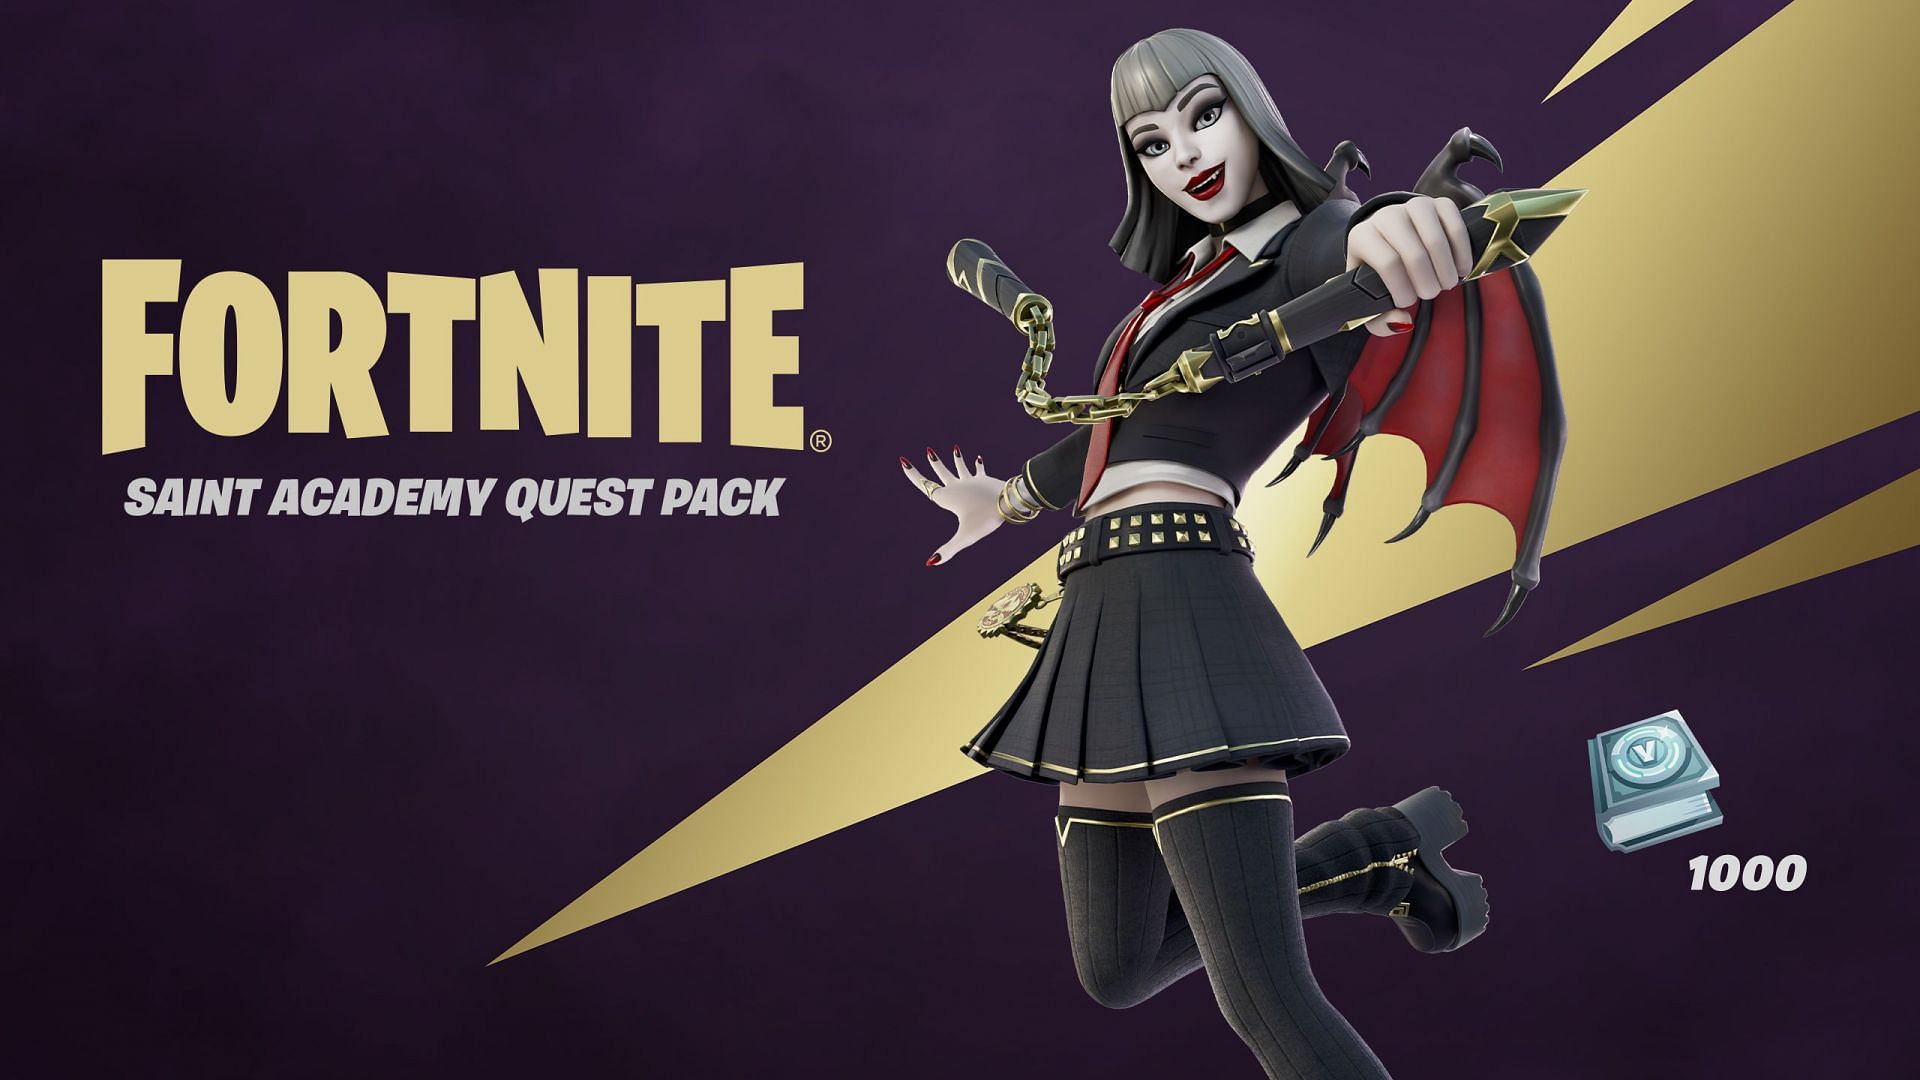 The Saint Academy quest pack was added with the Fortnitemares update (Image via Epic Games)